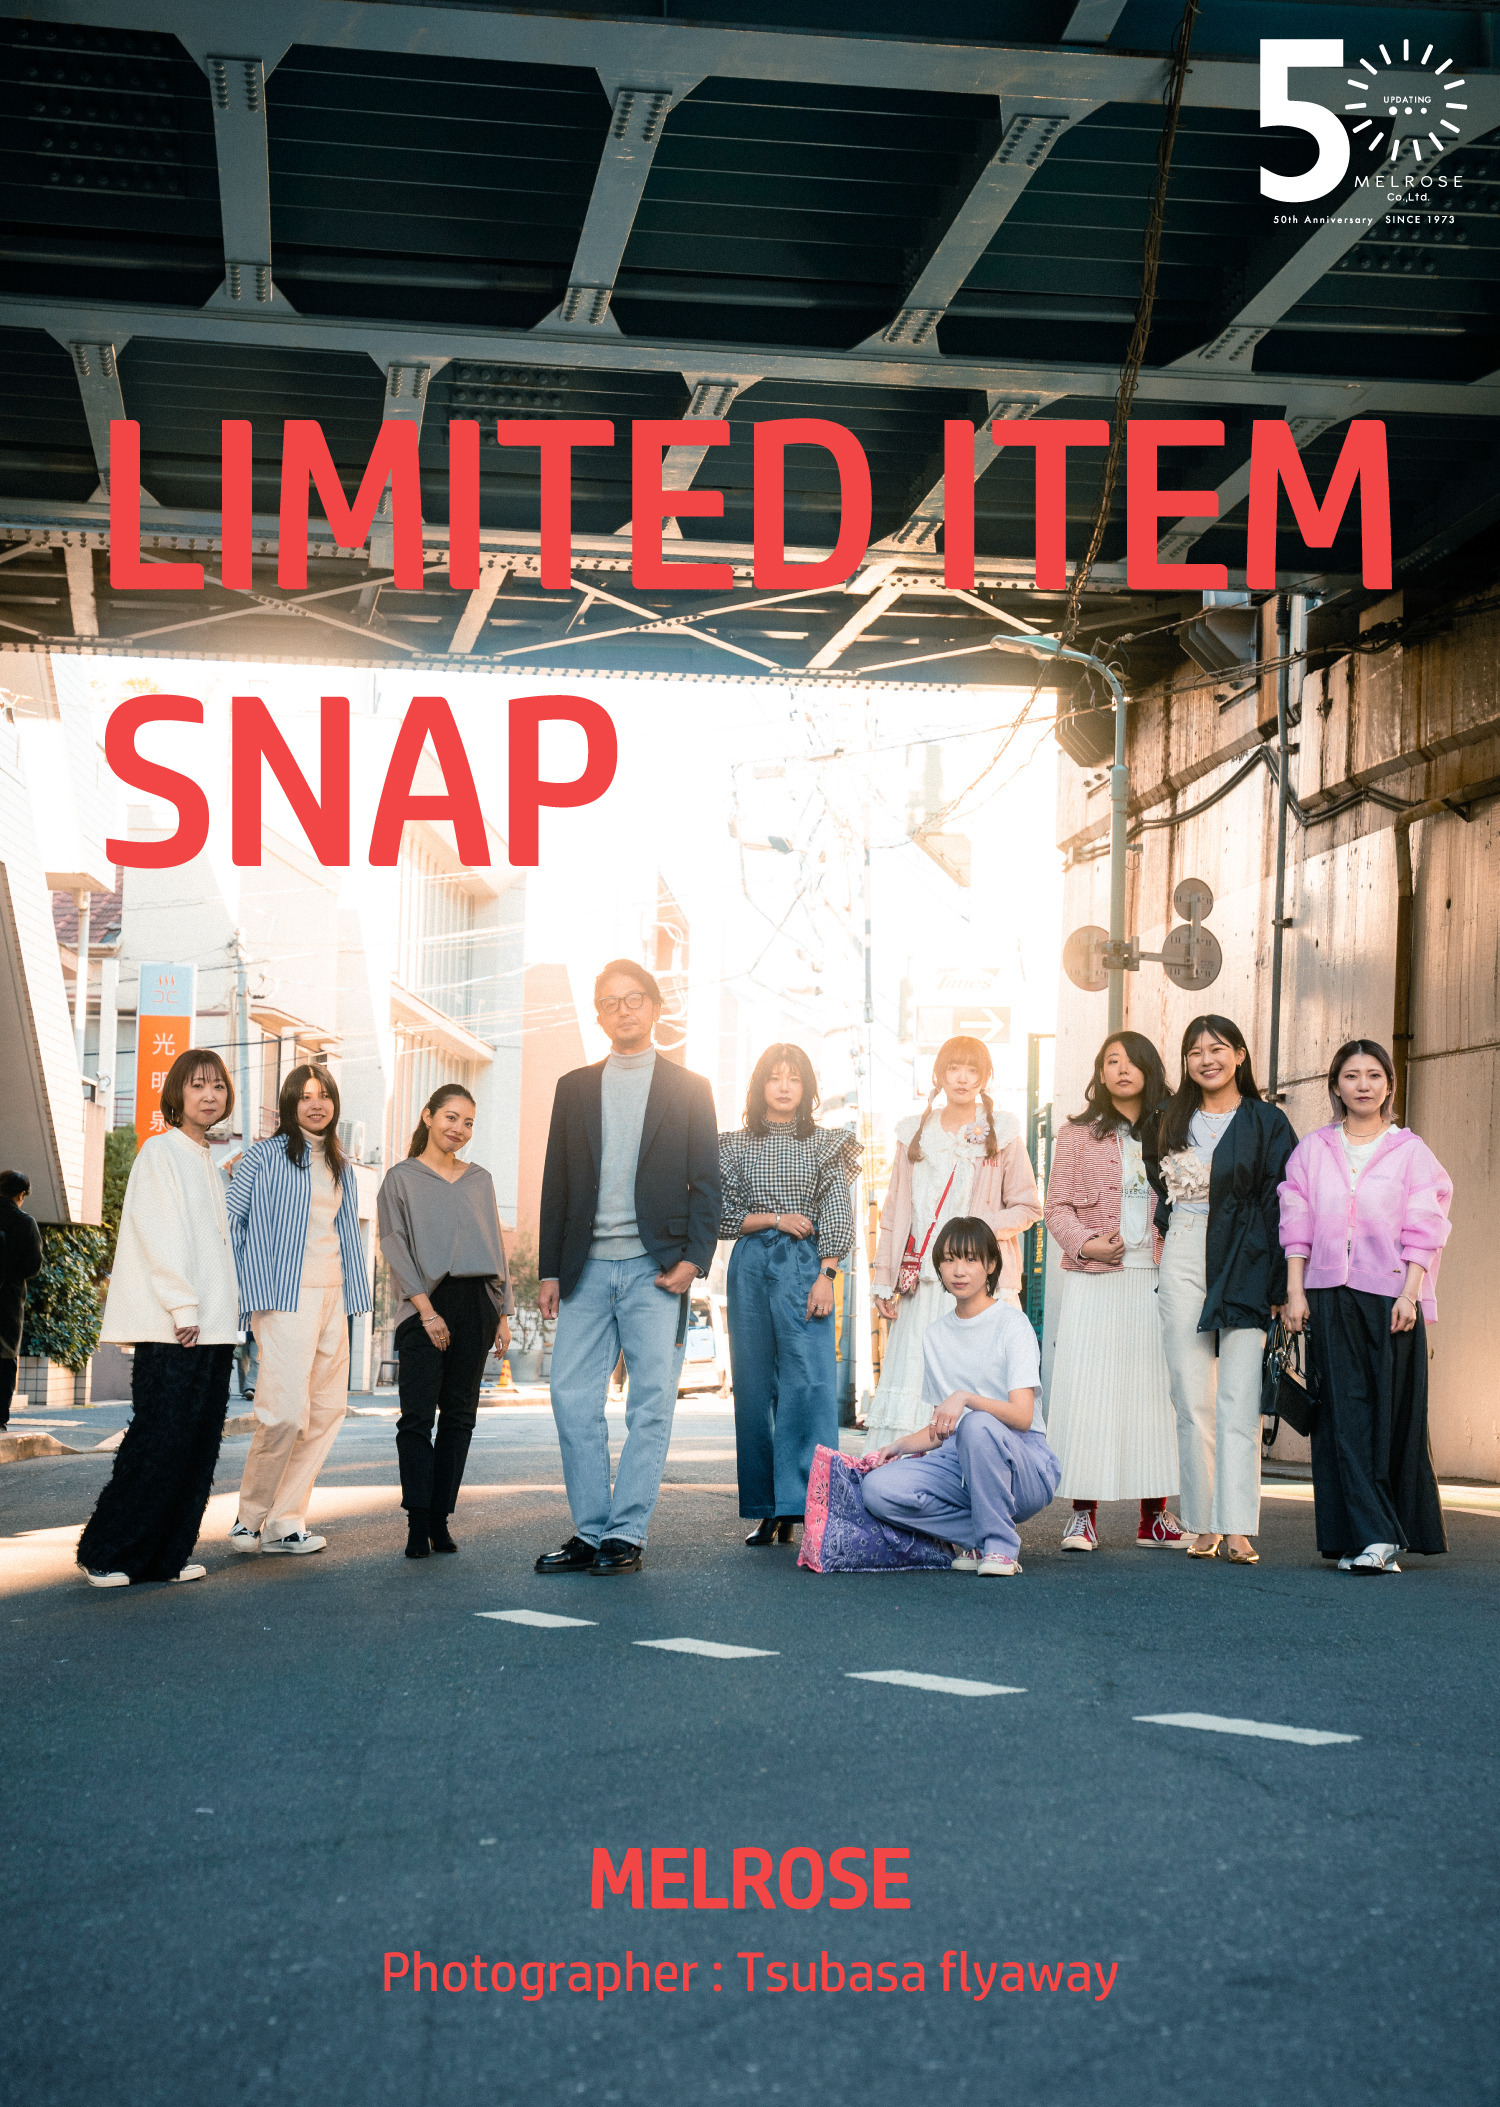 LIMITED ITEM SPECIAL SNAP